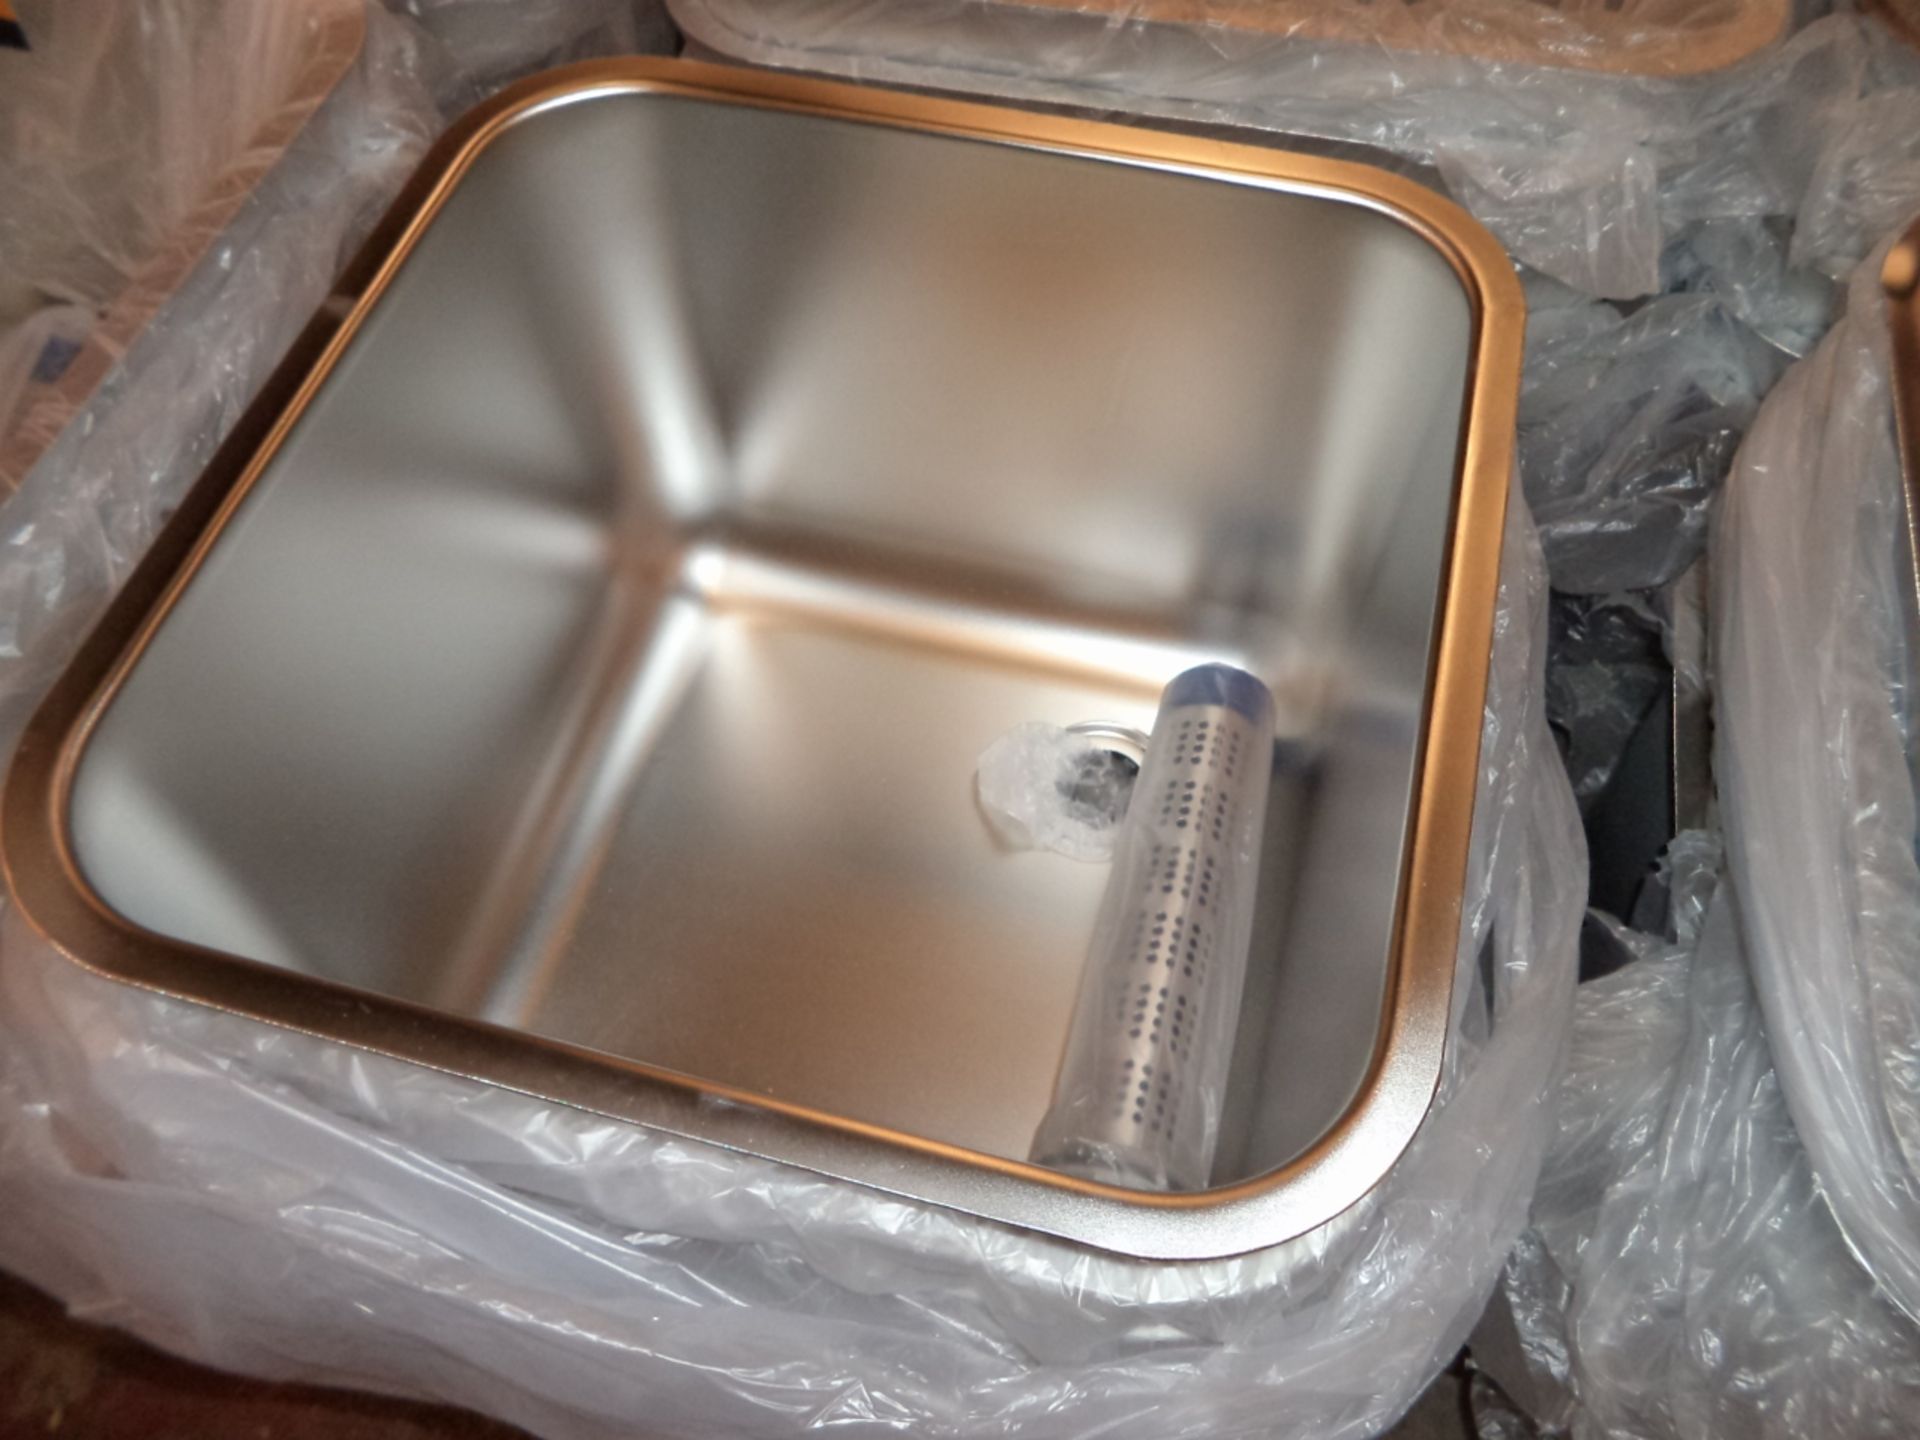 5 off square stainless steel single bowl sinks, in each instance including a waste pipe, in - Image 5 of 5